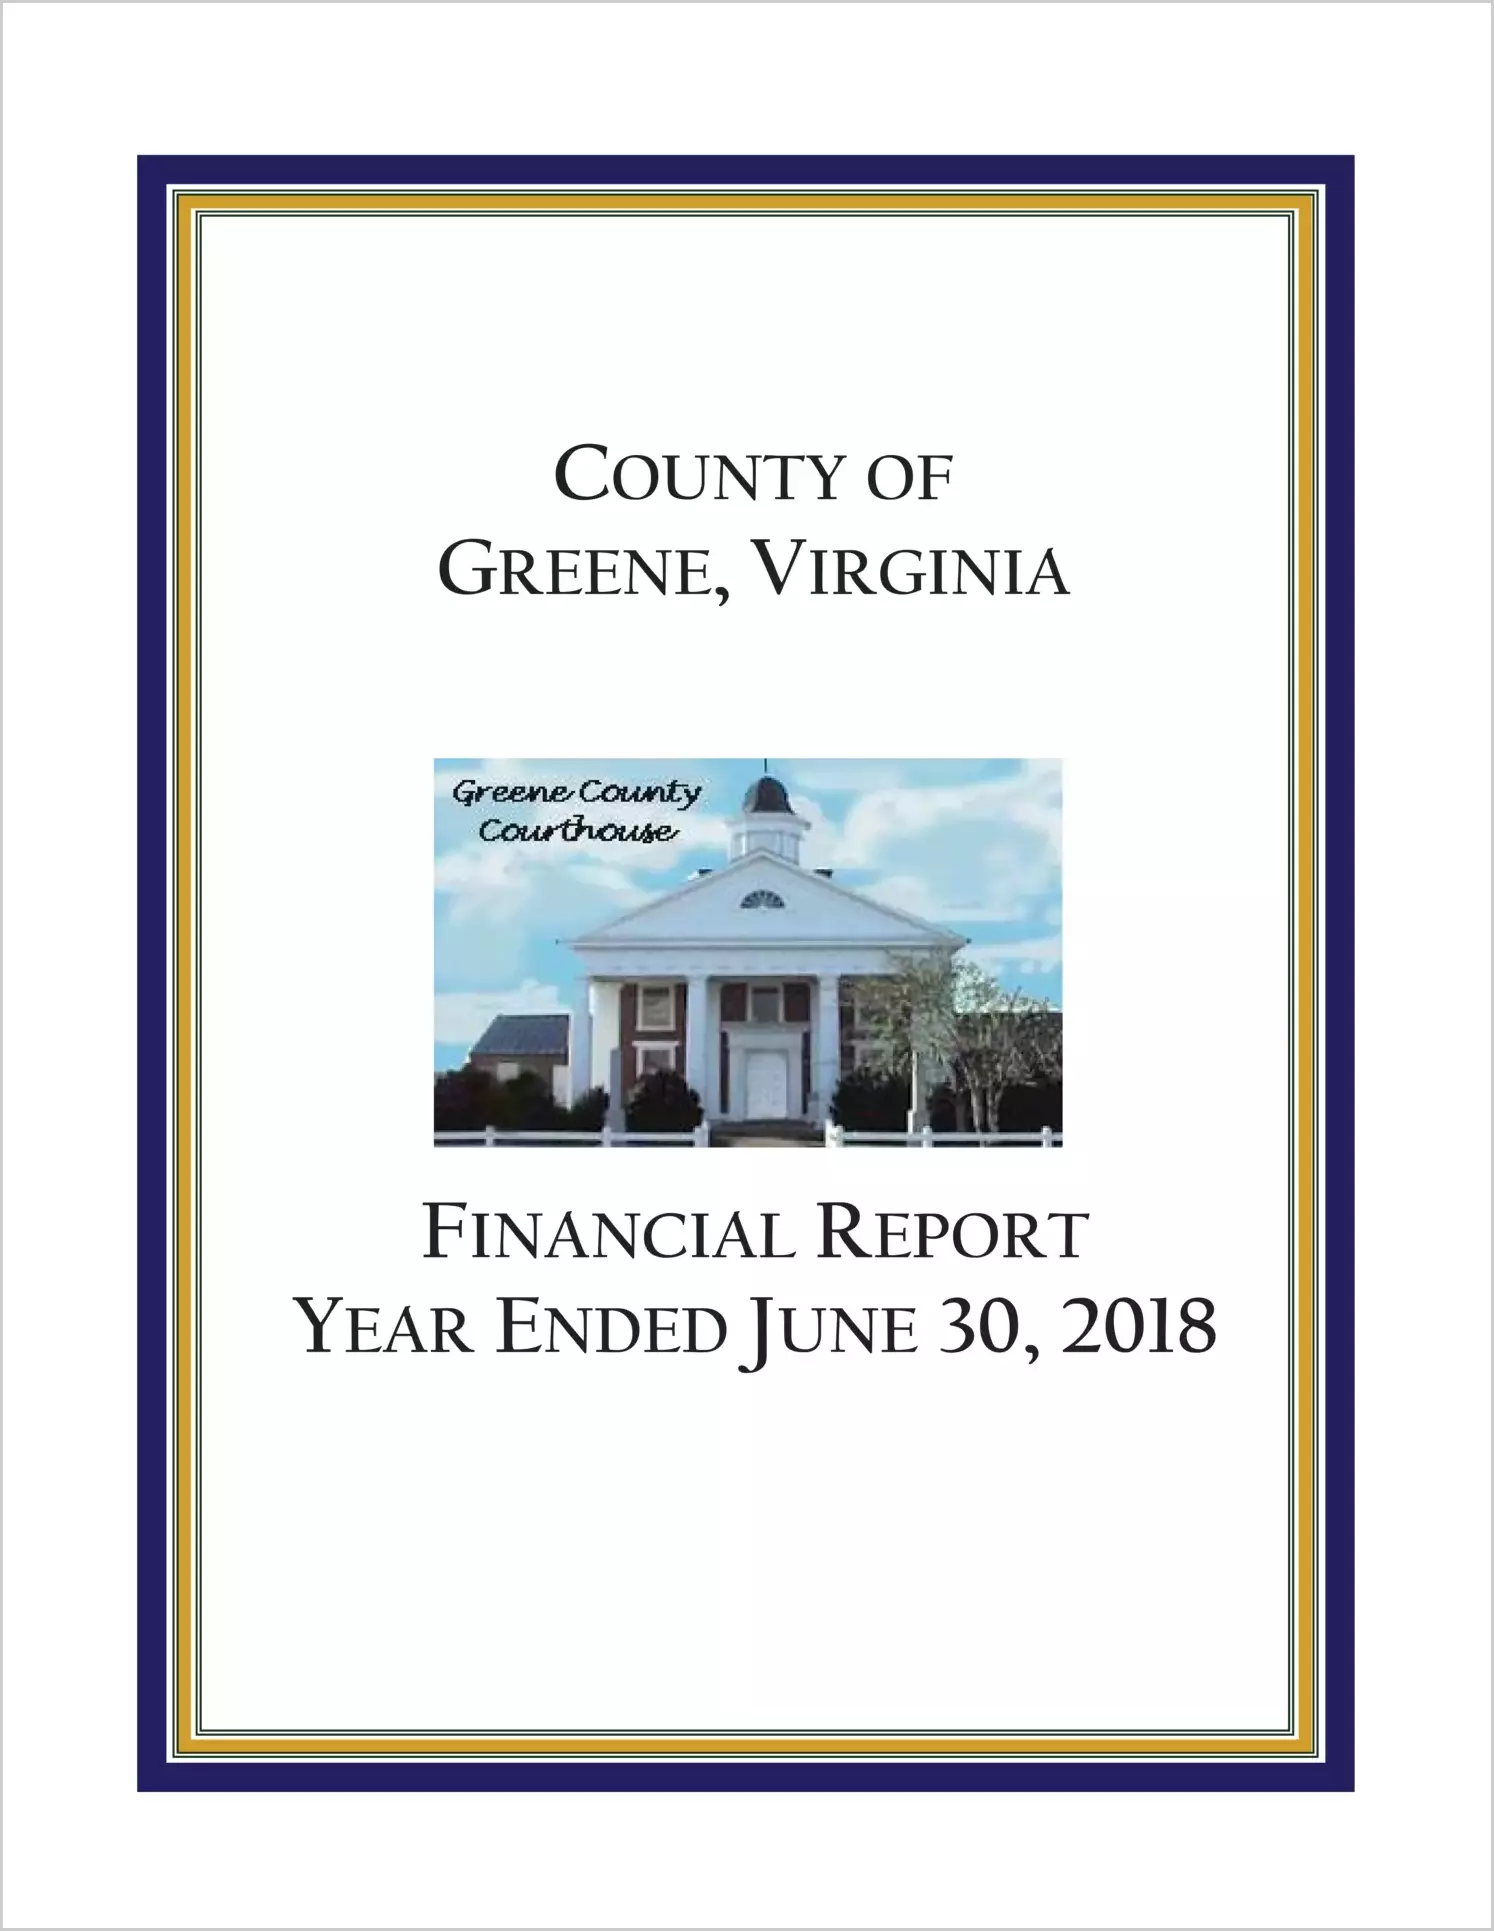 2018 Annual Financial Report for County of Greene